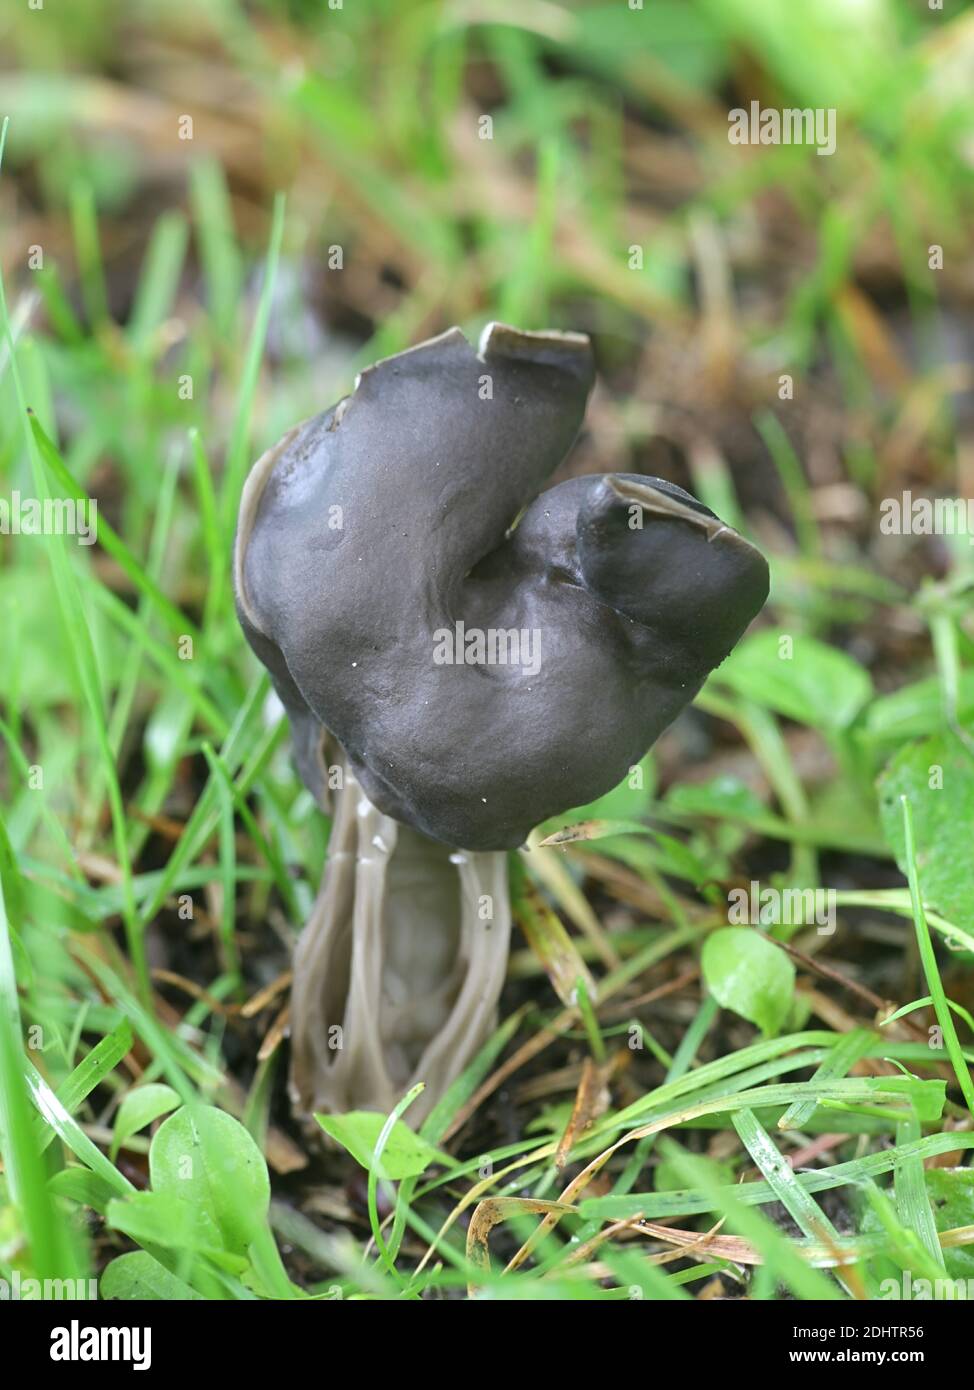 Slate grey saddle, Helvella lacunosa, known also as fluted black elfin saddle, wild mushrooms from Finland Stock Photo